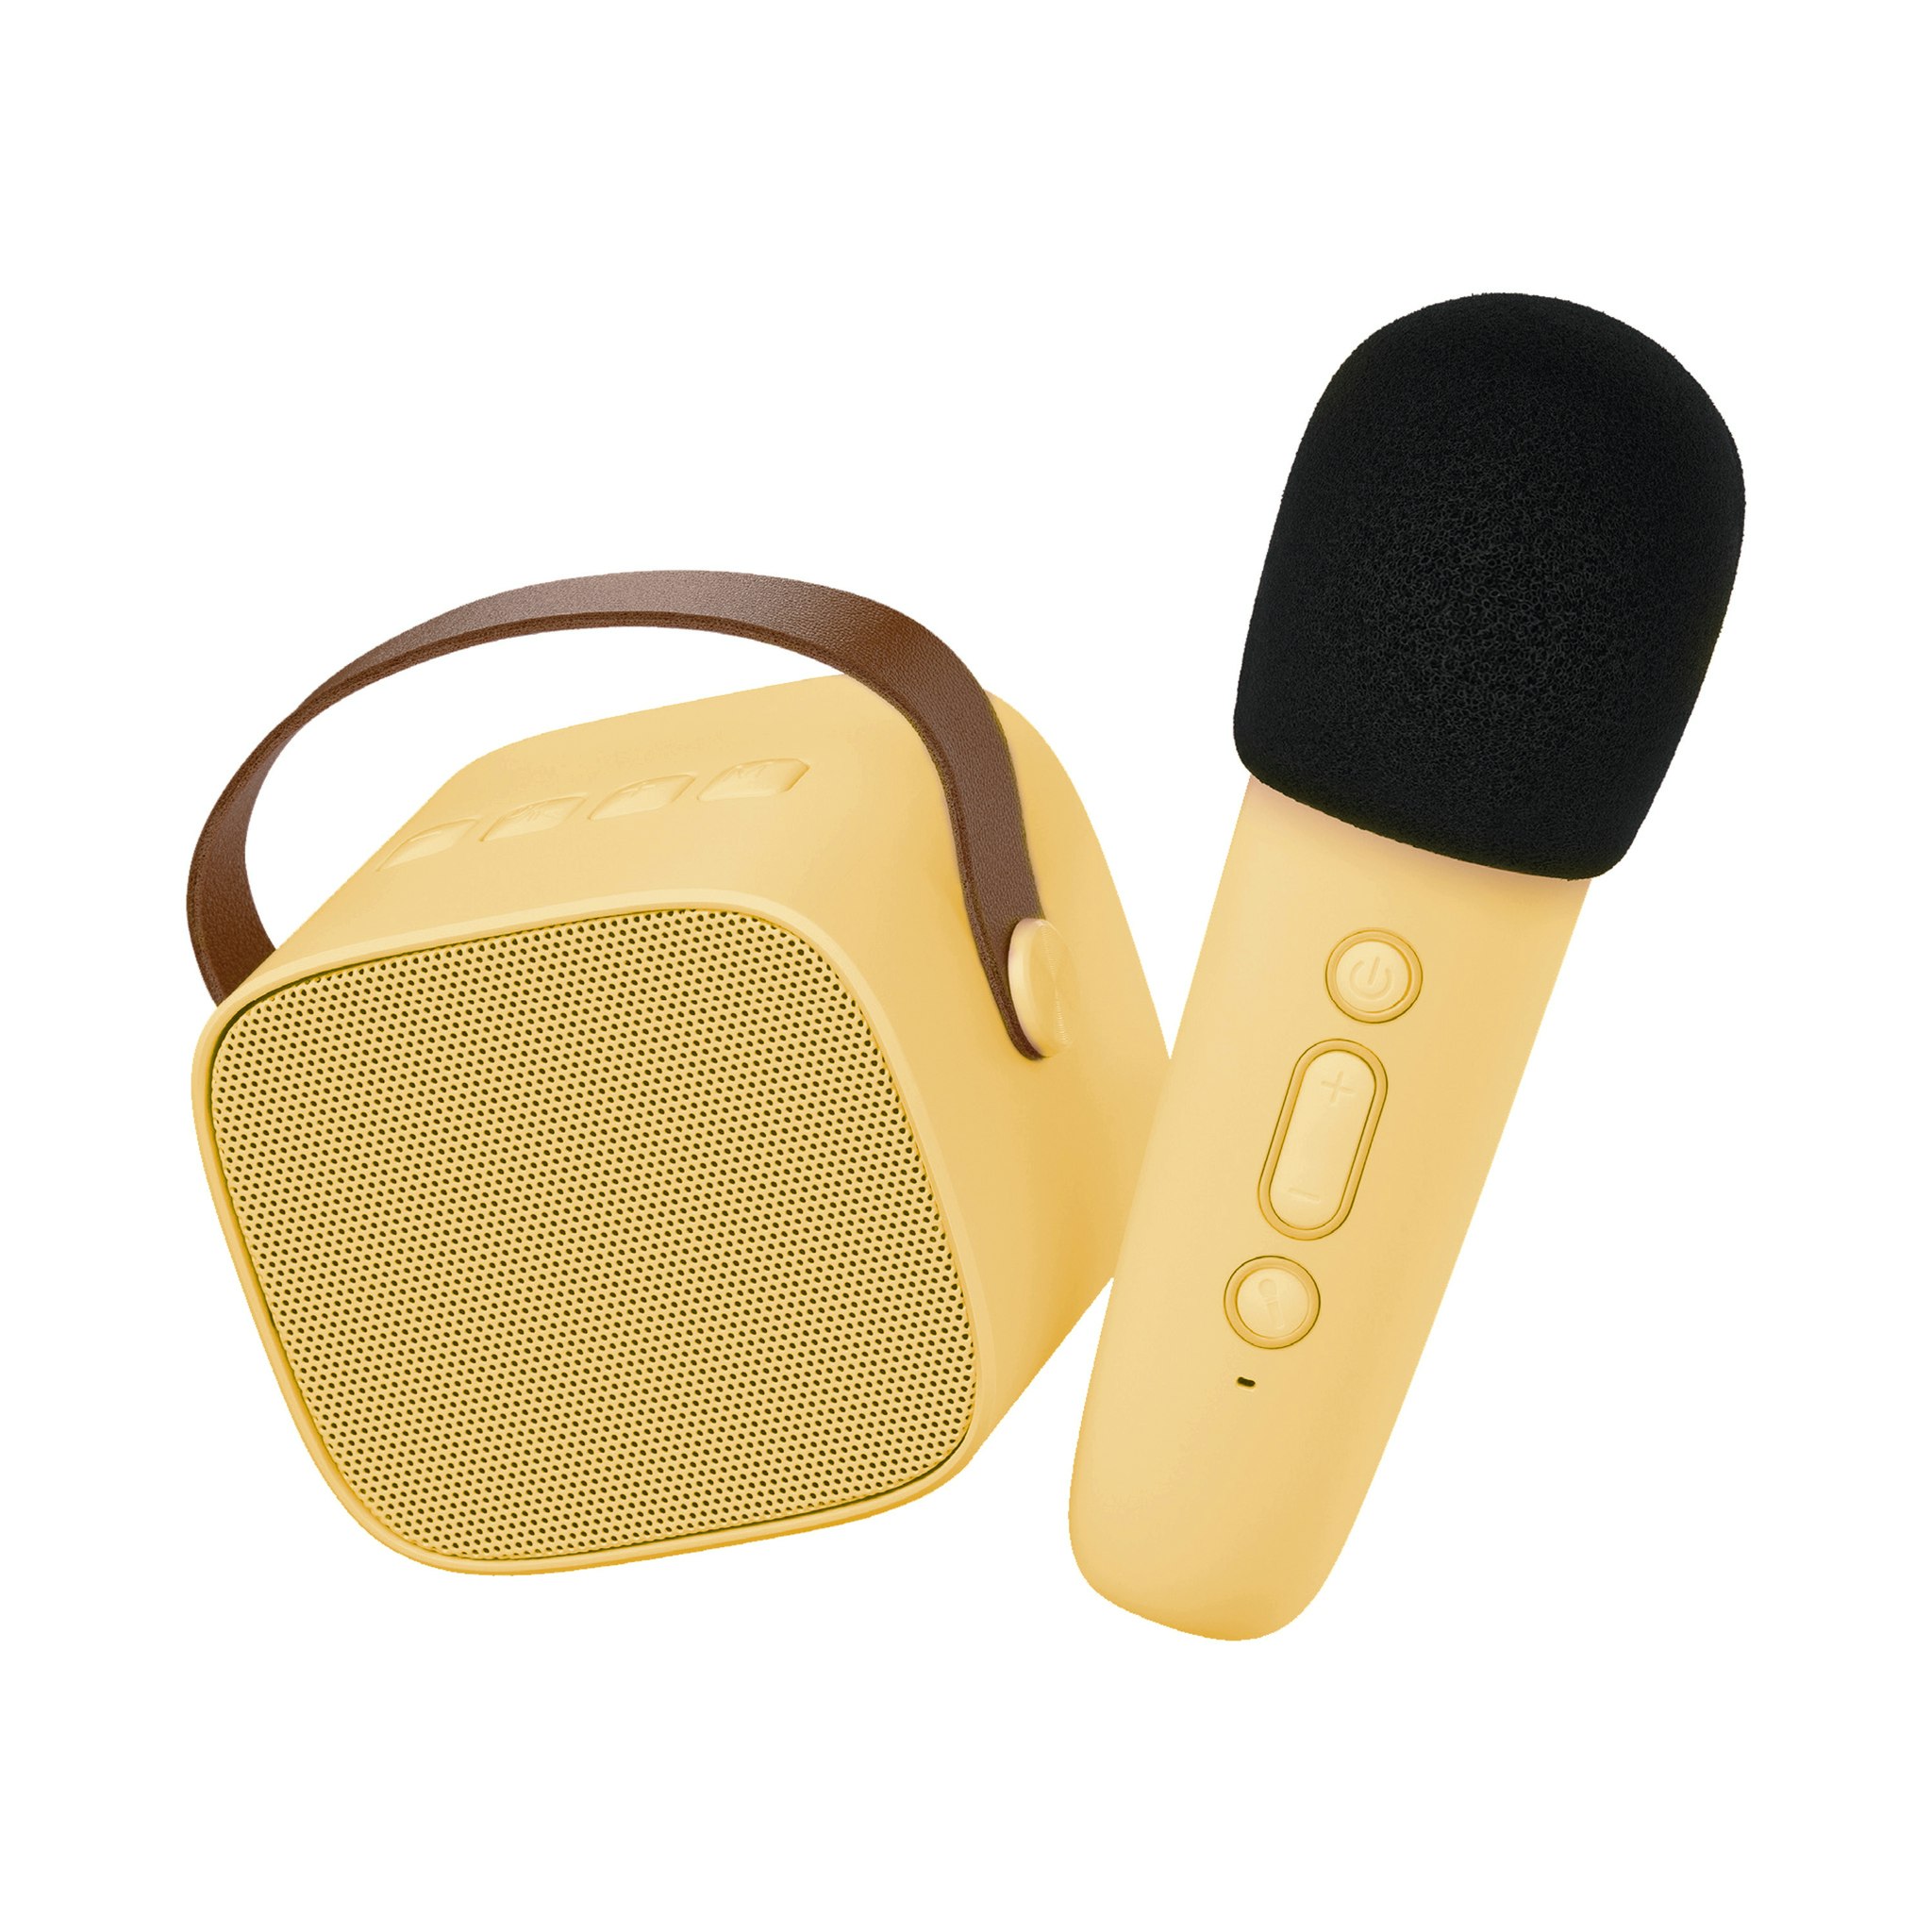 Lalarma- Bluetooth Speaker With Wireless Microphone - Yellow